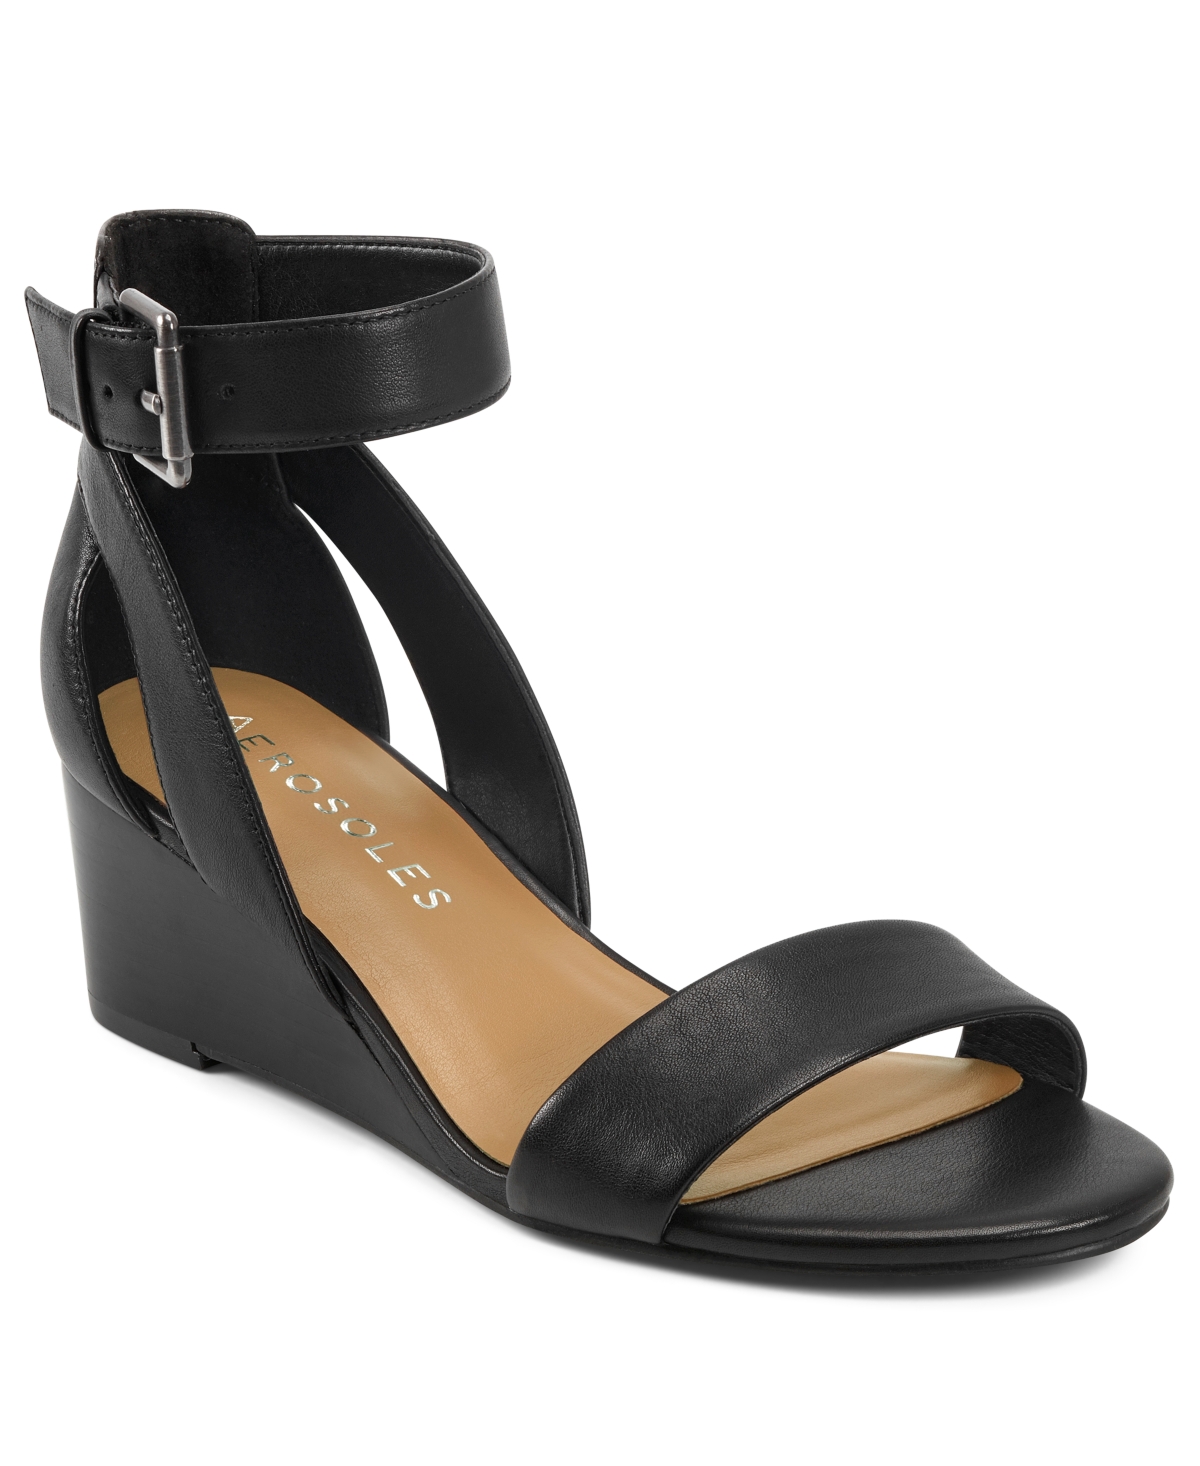 UPC 887039887495 product image for Aerosoles Willowbrook Wedge Sandals Women's Shoes | upcitemdb.com